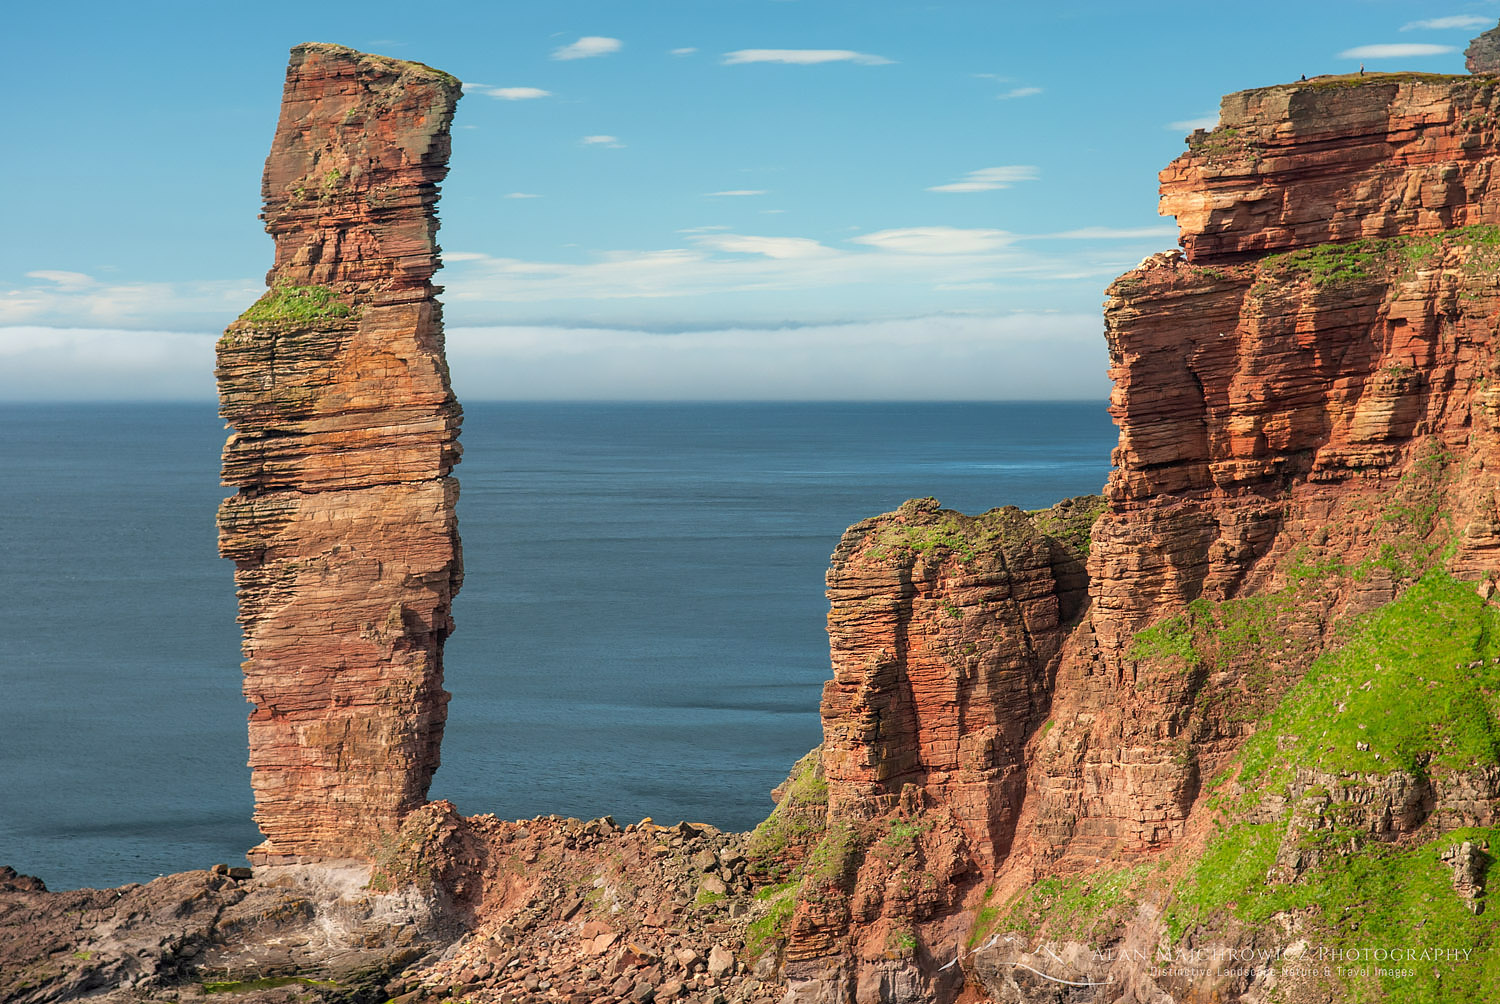 The Old Man Of Hoy a 450' tall sea stack on the Isle of Hoy Orkney Islands Scotland #12689